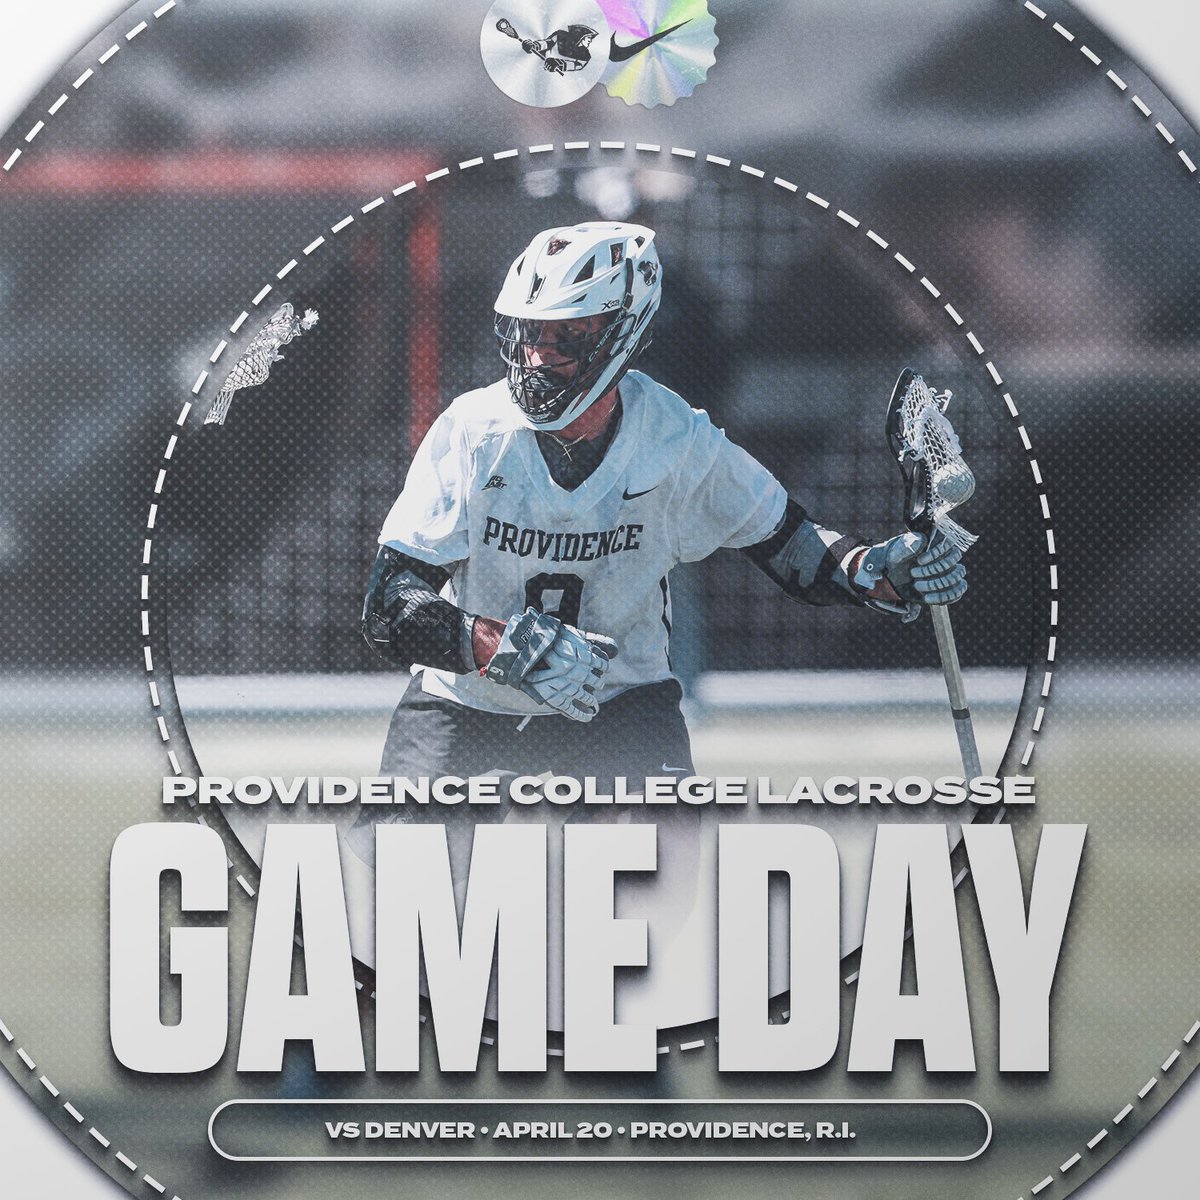 Gameday in Friartown‼️ Come celebrate the seniors on Senior Day in the final home game of the season! 🆚 @DU_MLAX ⏰ 12:00 p.m. 🏟️ Chapey Field at Anderson Stadium | Providence, R.I. 🔗 ​​linktr.ee/pclacrosse